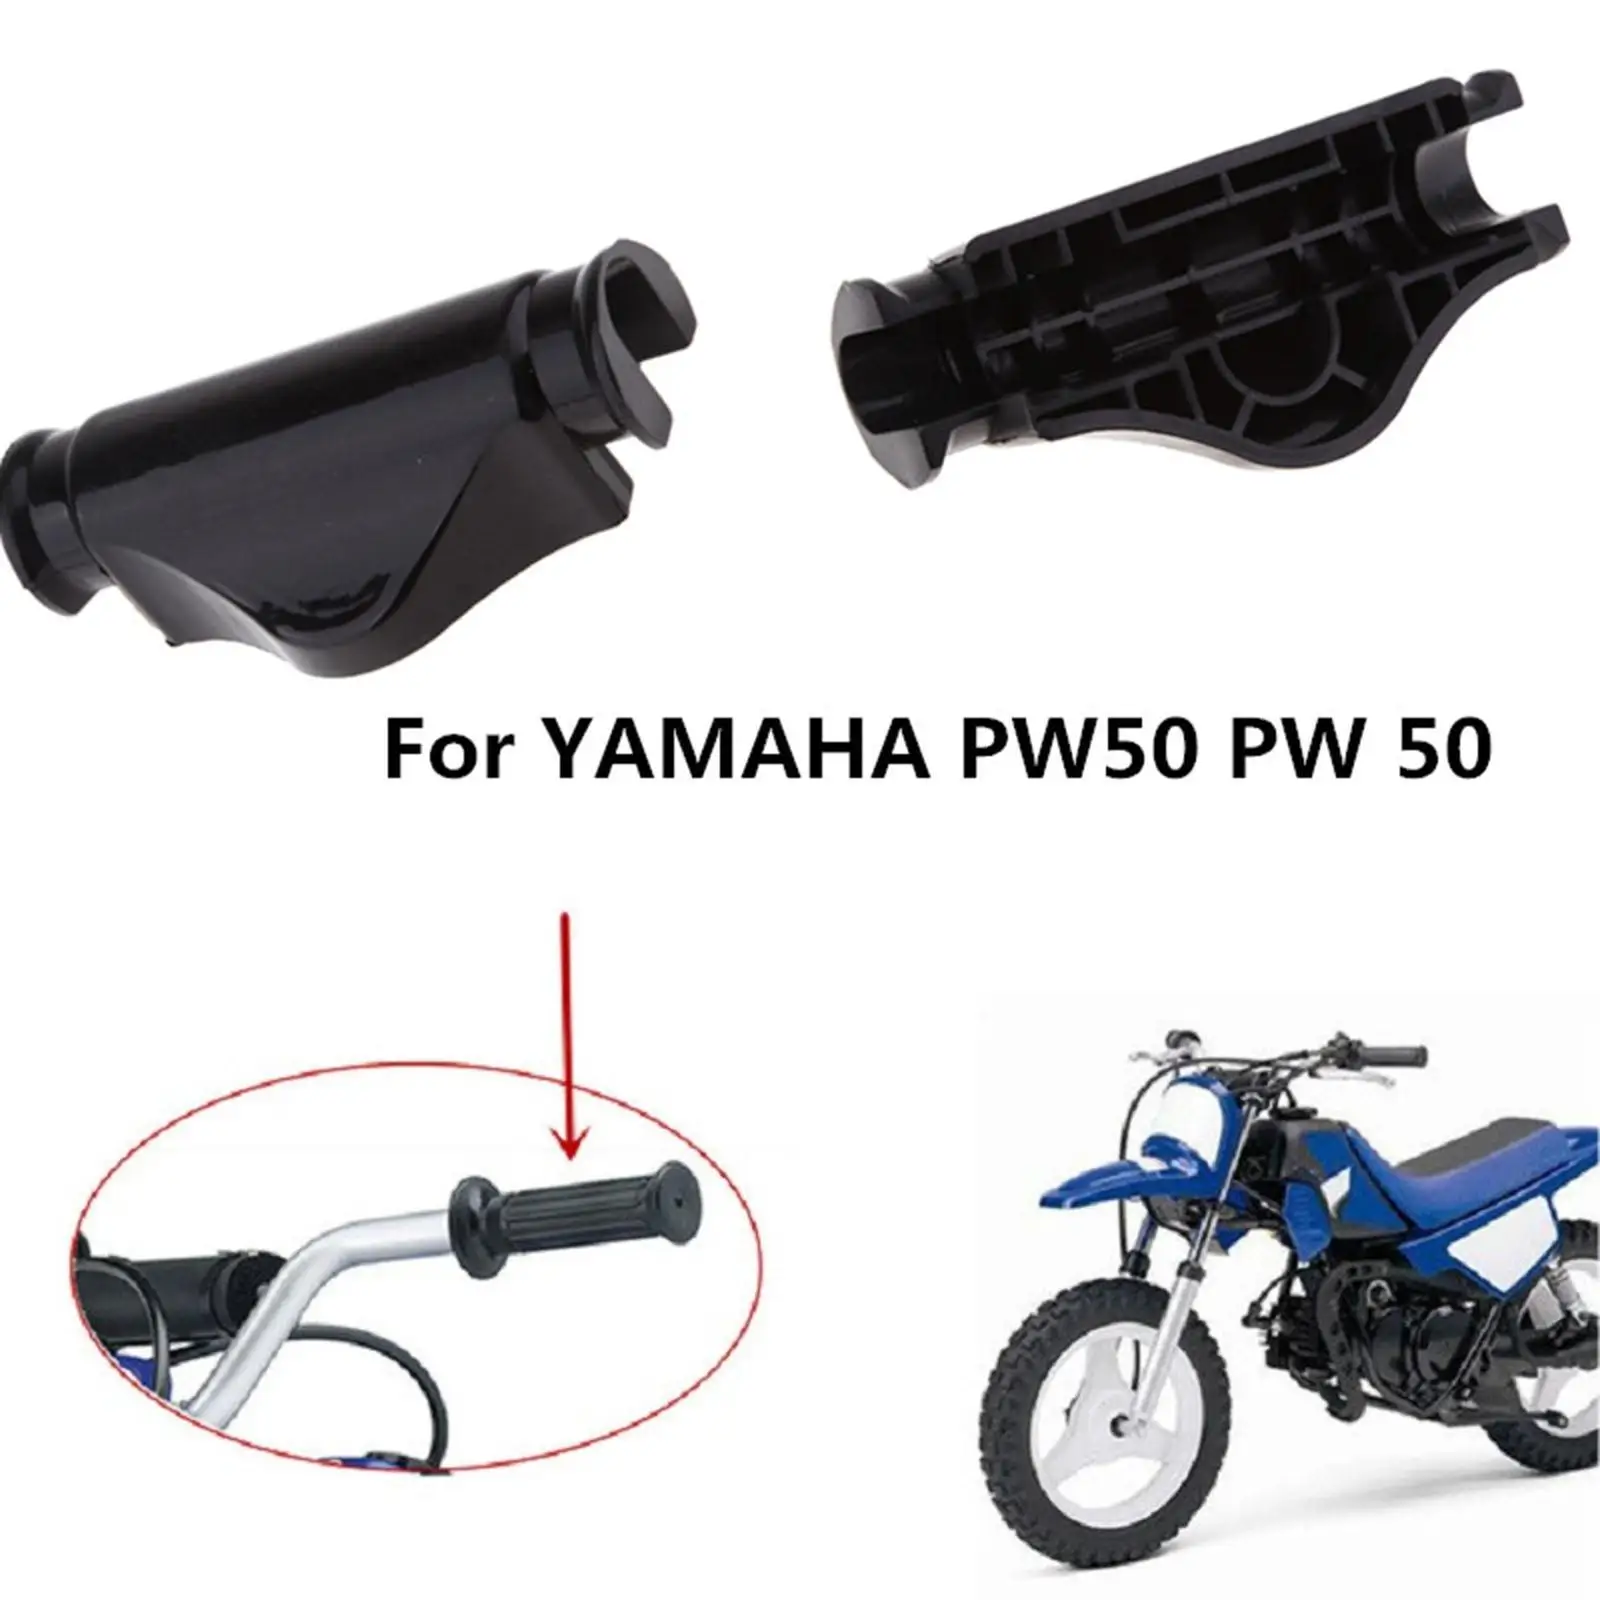 Motorcycle Rubber Handlebar for PW50 1991 - 2017 Black